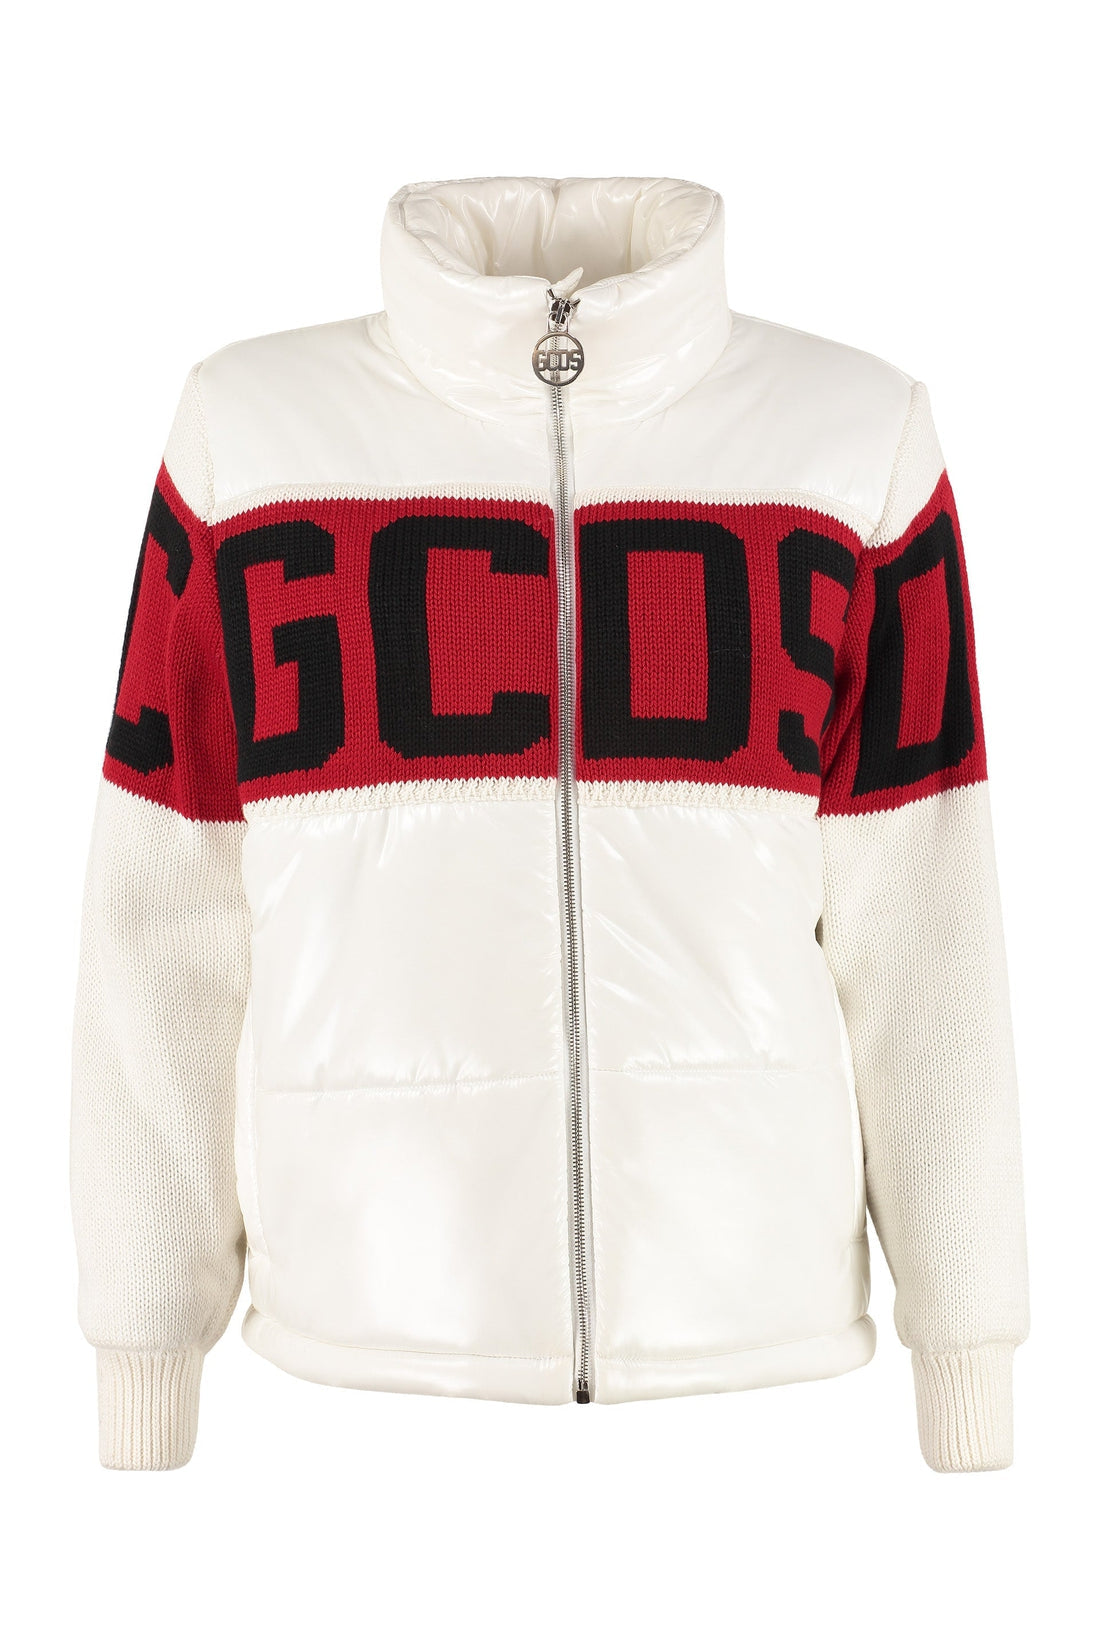 GCDS-OUTLET-SALE-Full zip padded jacket-ARCHIVIST